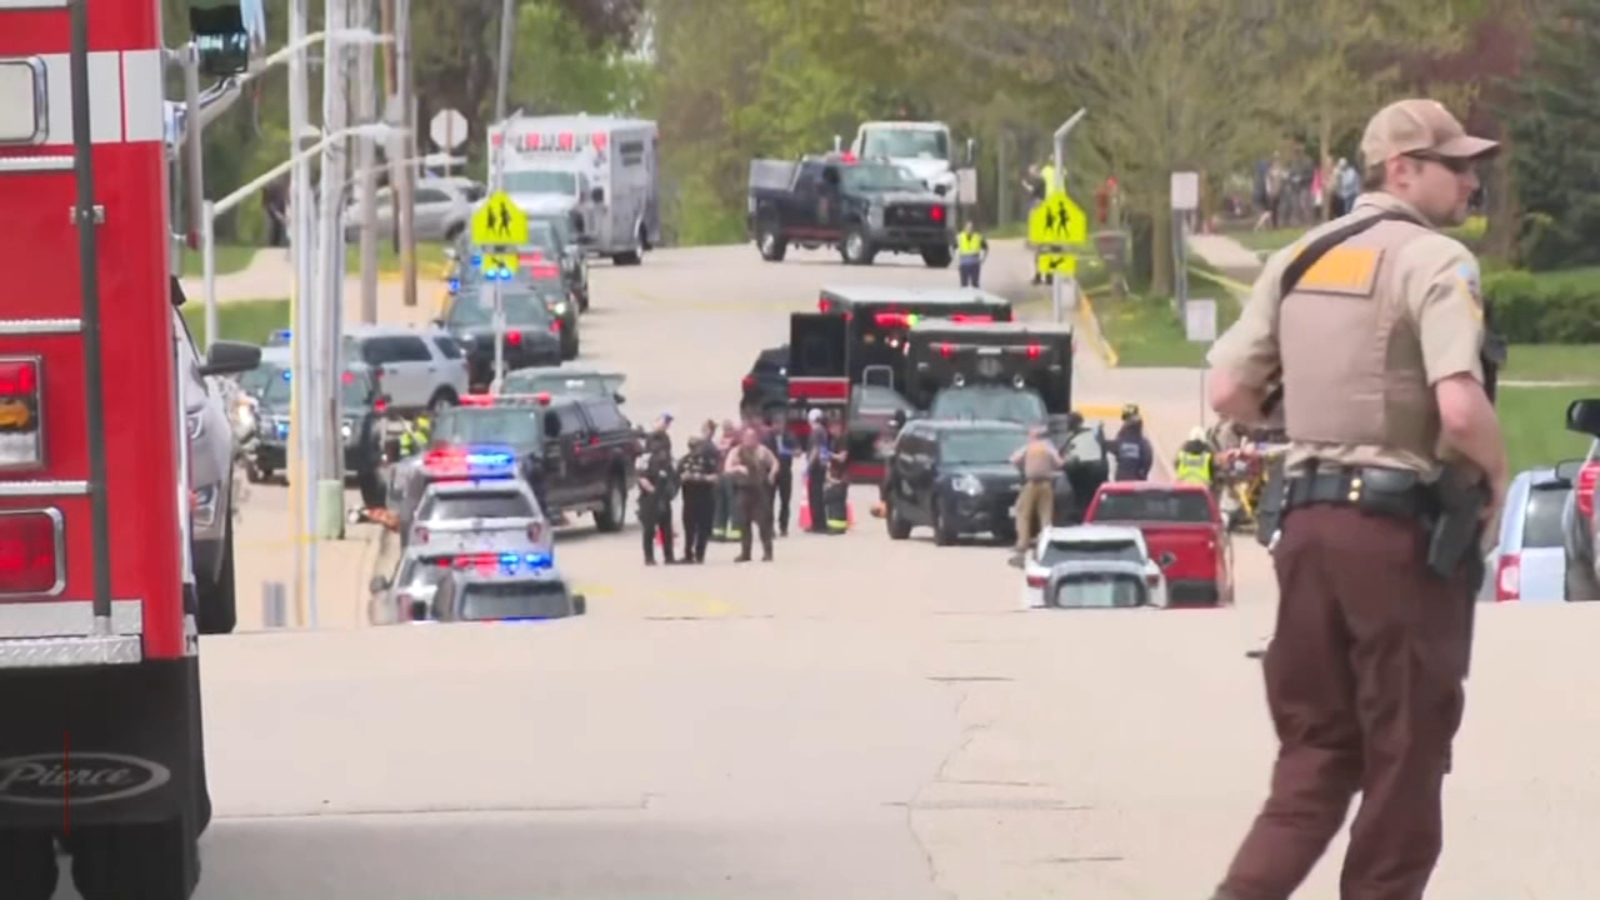 Mount Horeb, Wisconsin school shooting: Student with apparent long gun dead after police confrontation; threat ‘neutralized’ [Video]